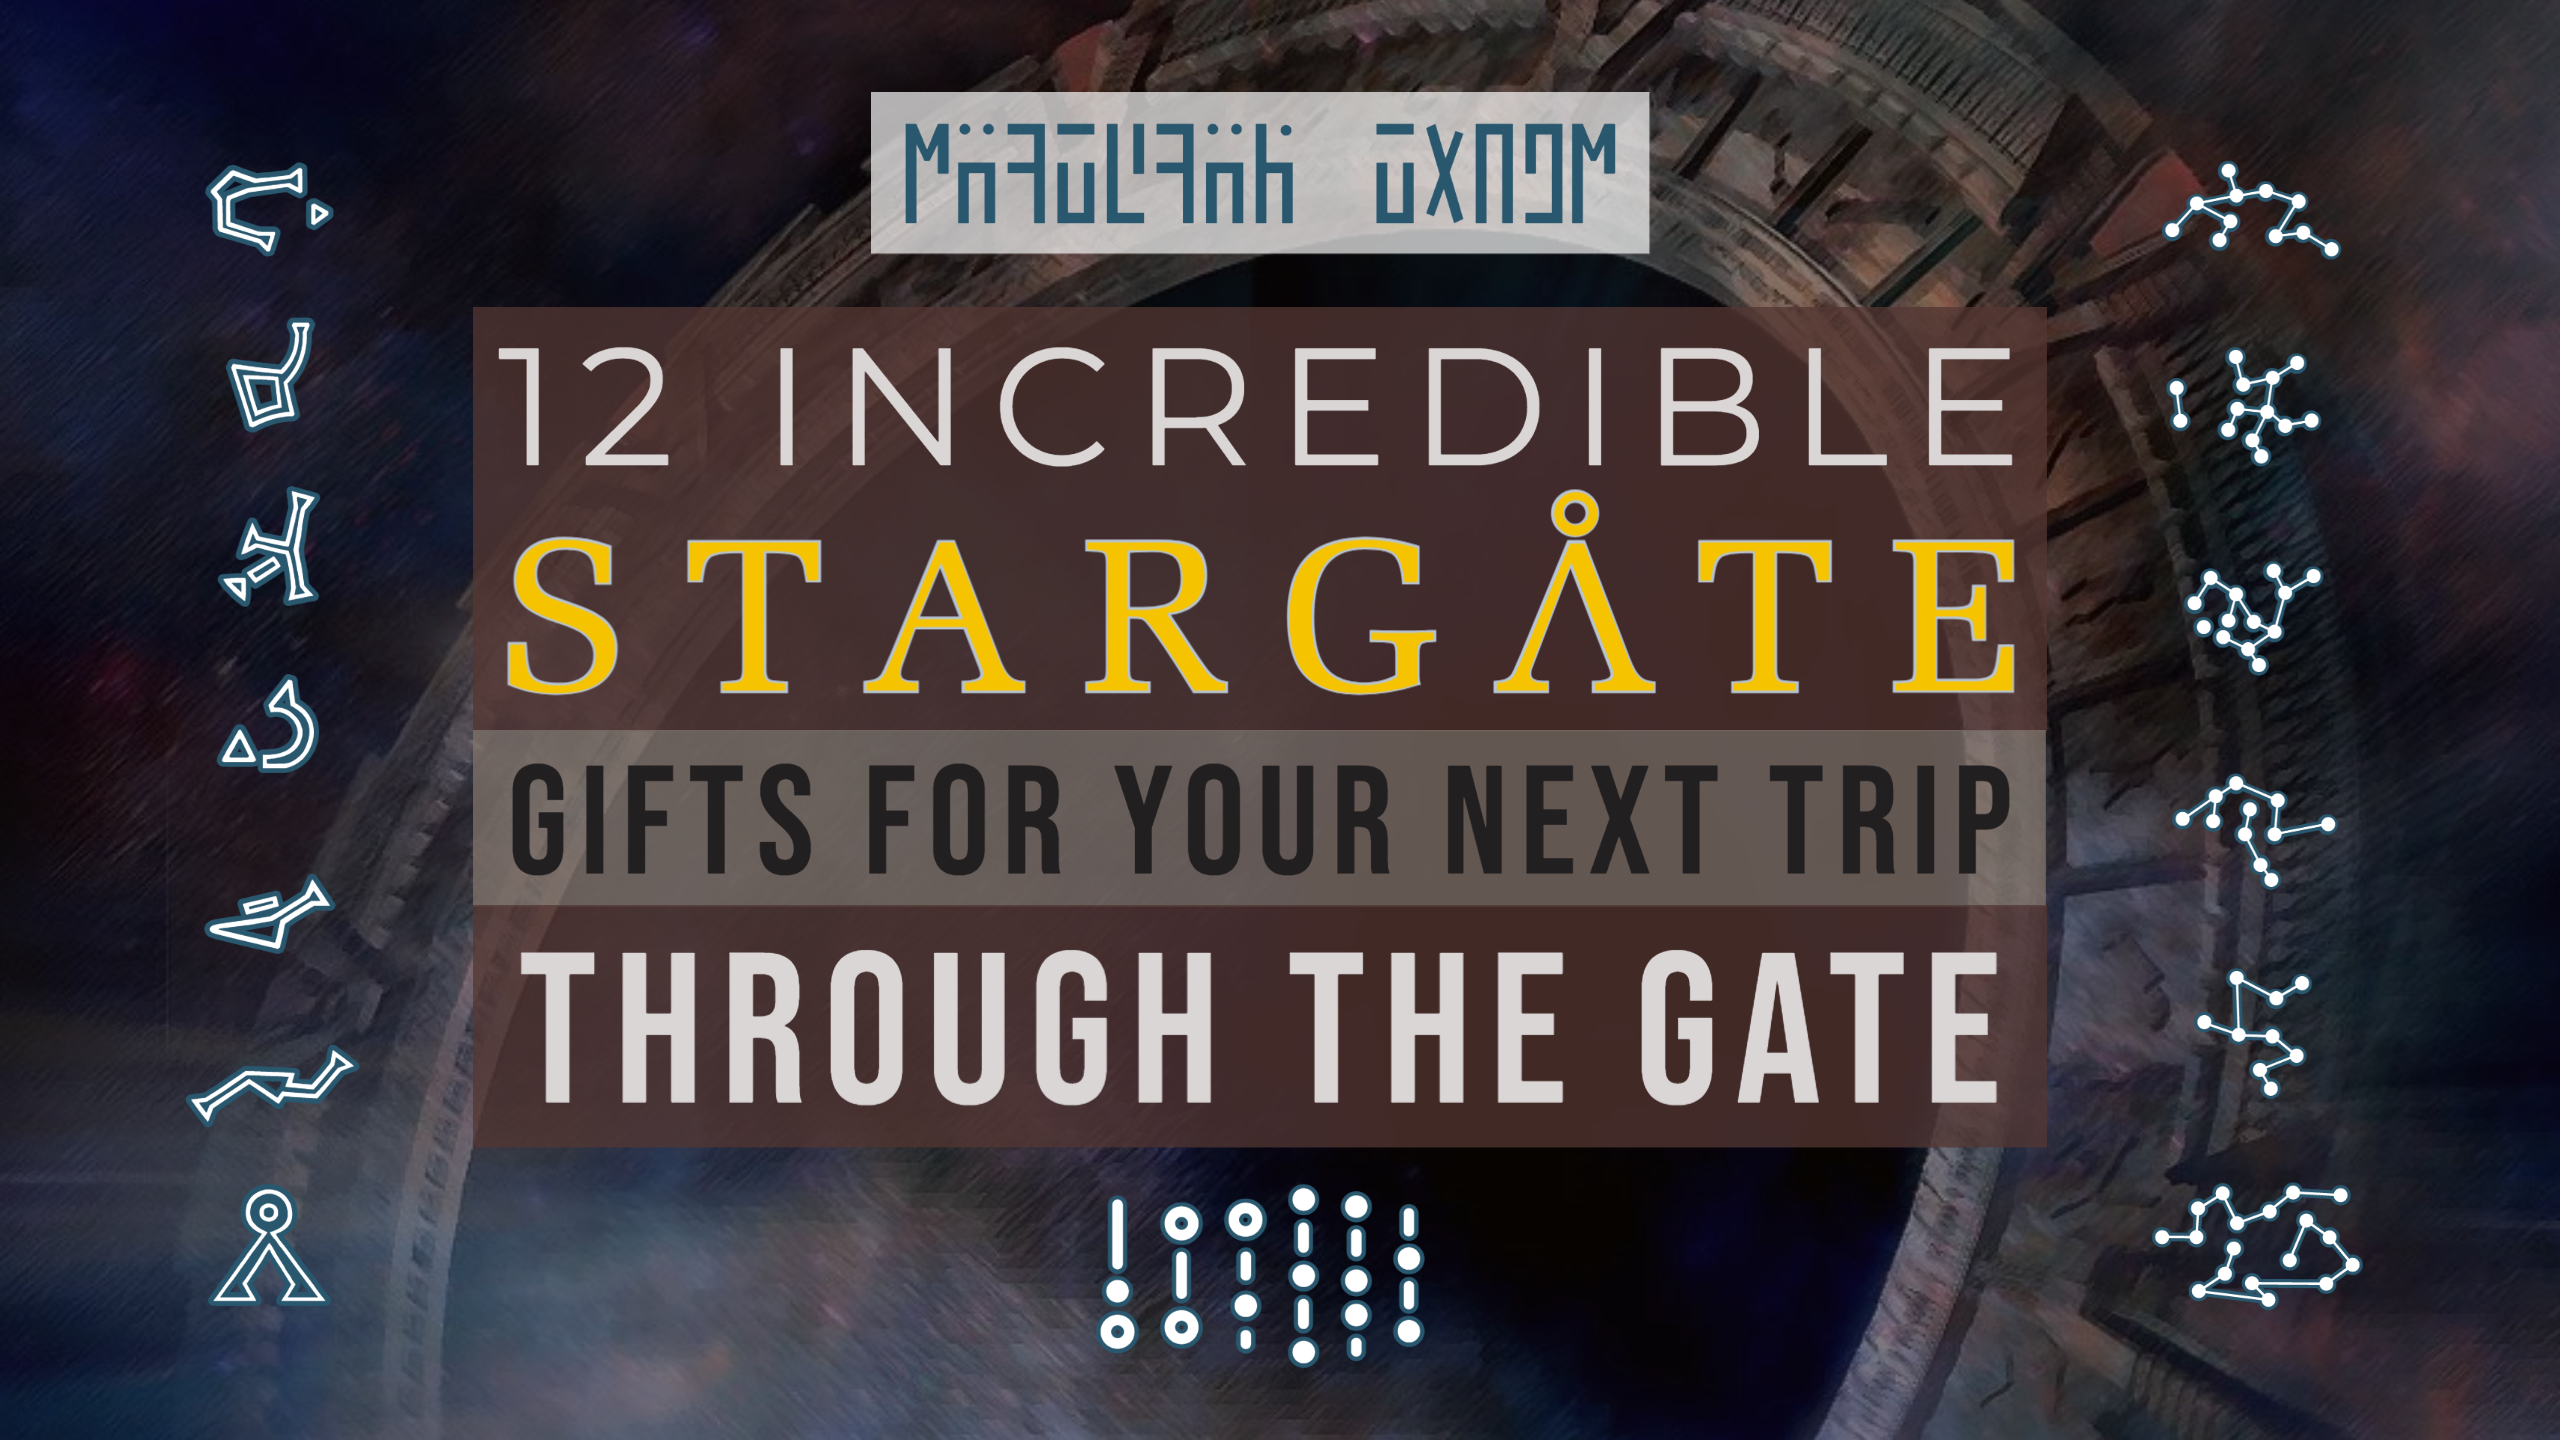 Incredible Stargate Gifts For Your Next Trip Through 12 Incredible Stargate Gifts For Your Next Trip Through The Gate Header